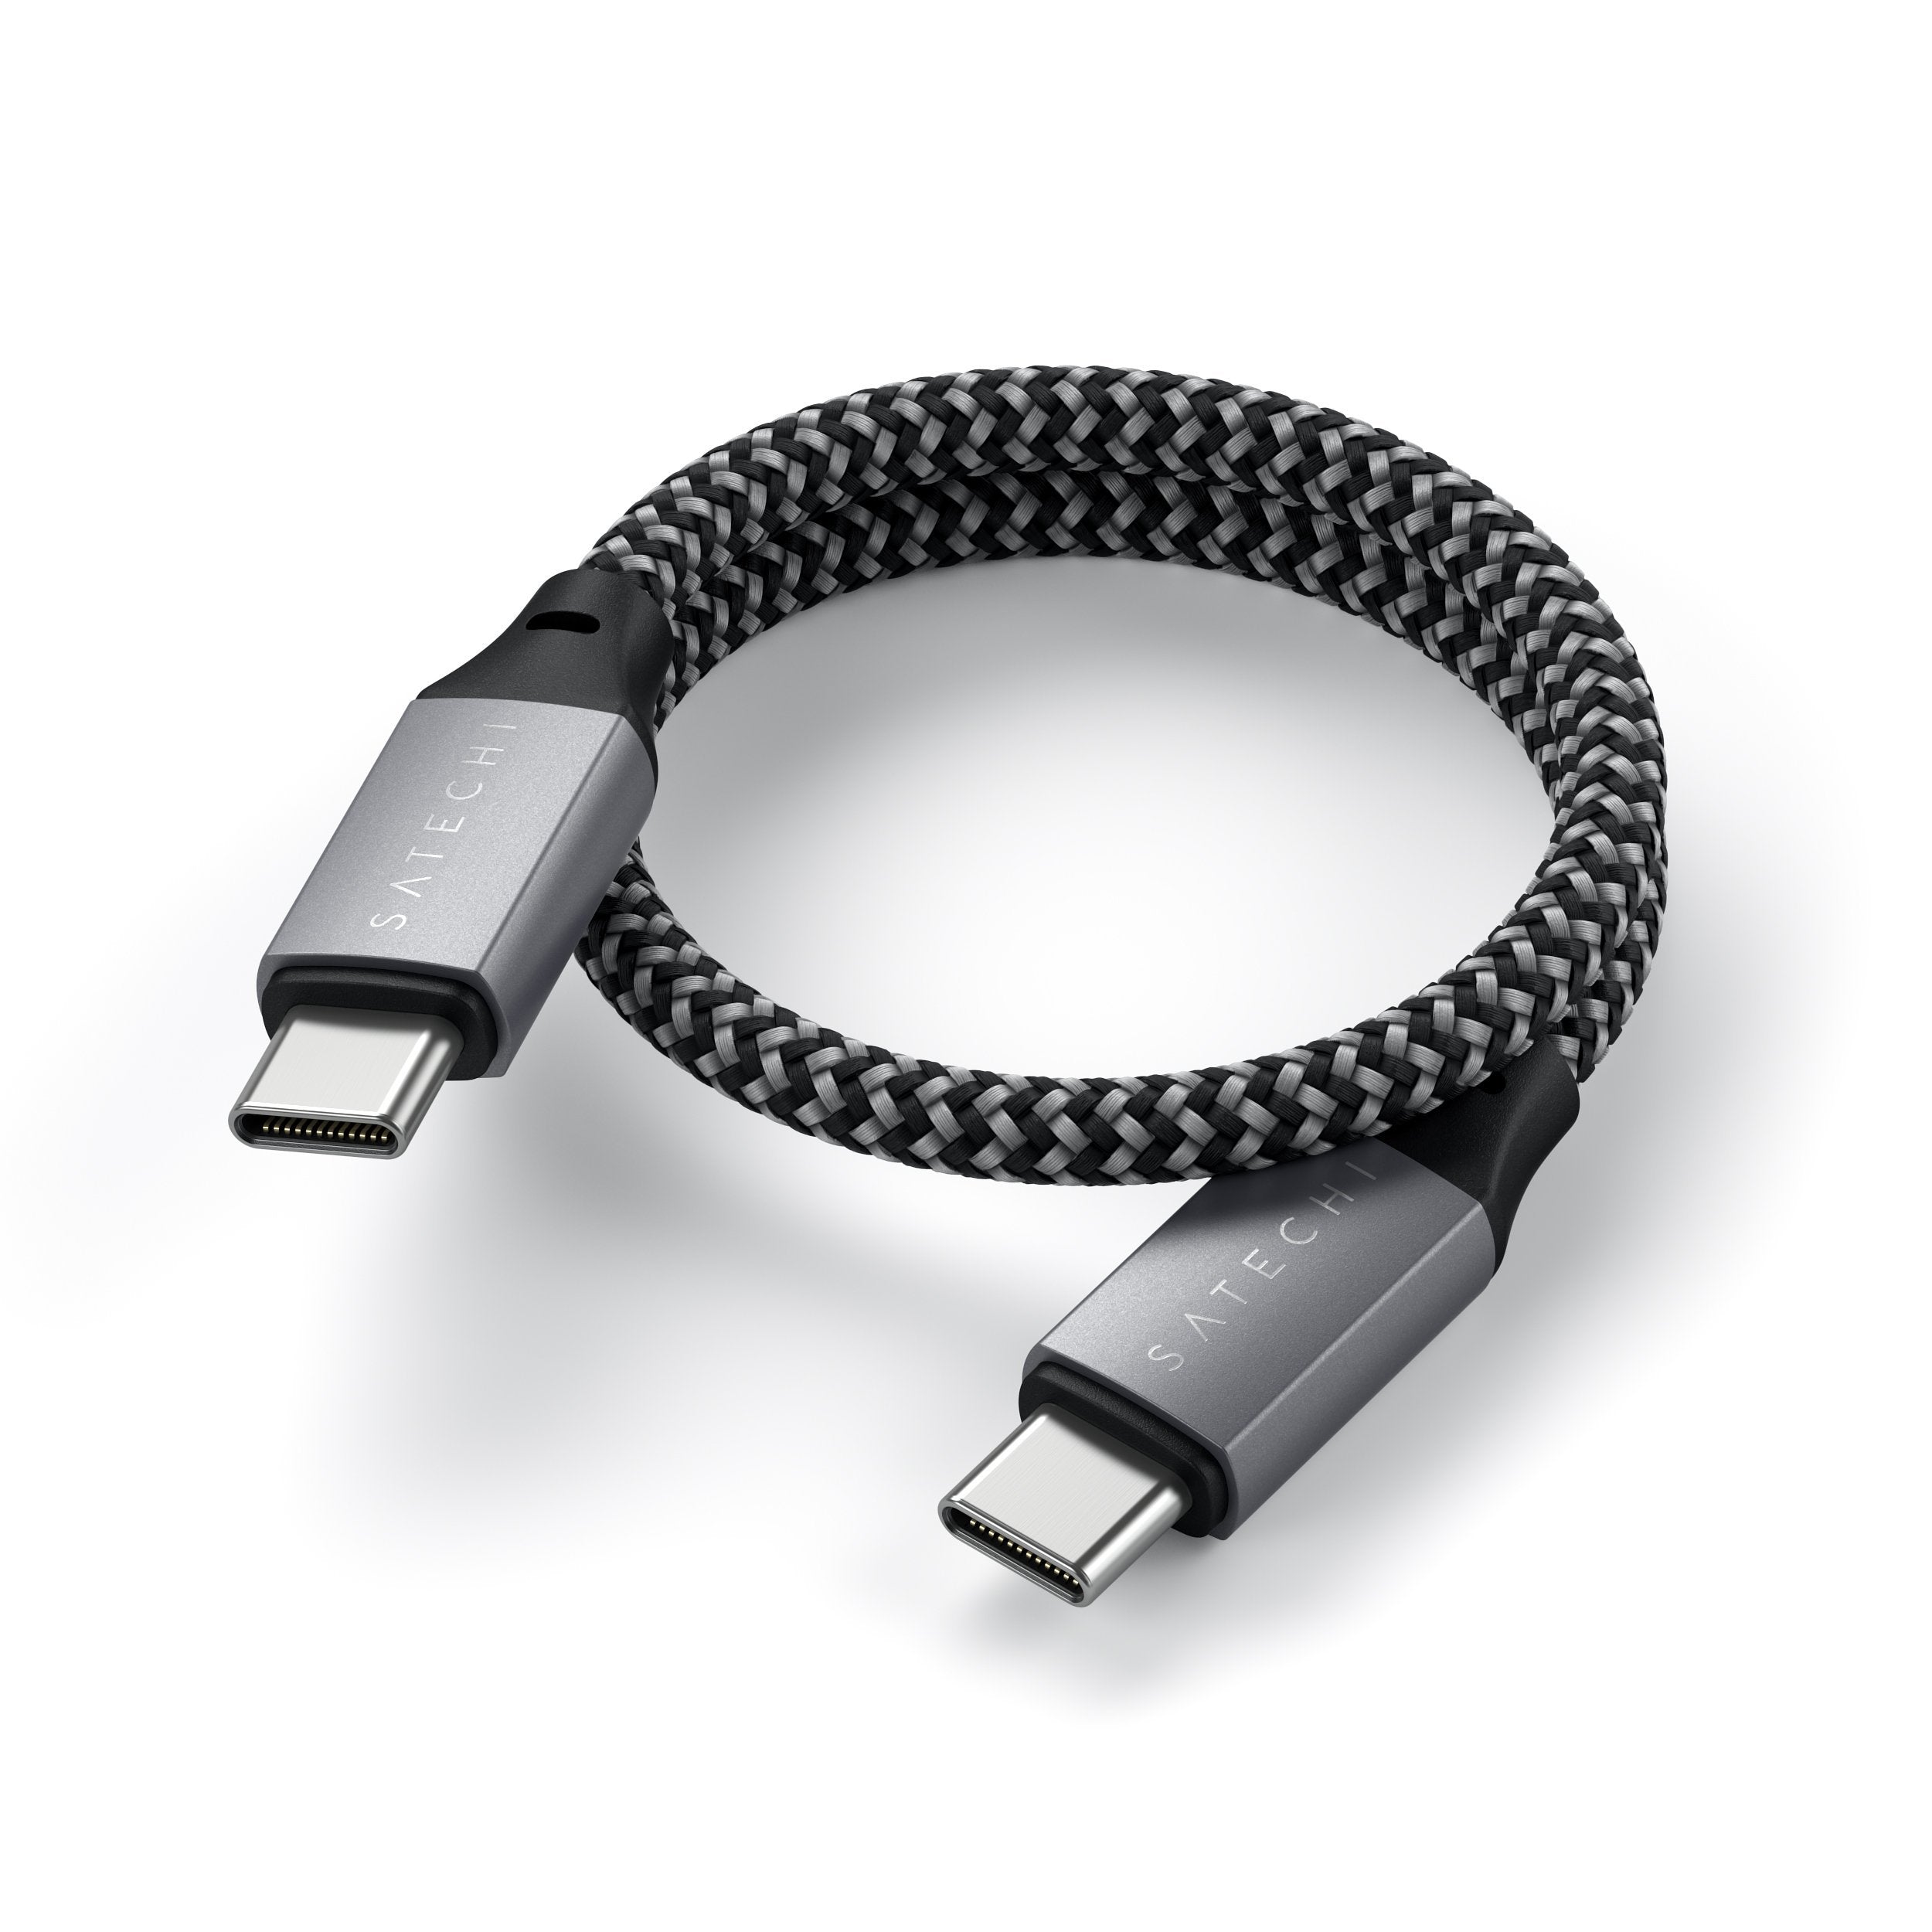 USB-C to USB-C Cable - 10 Inches